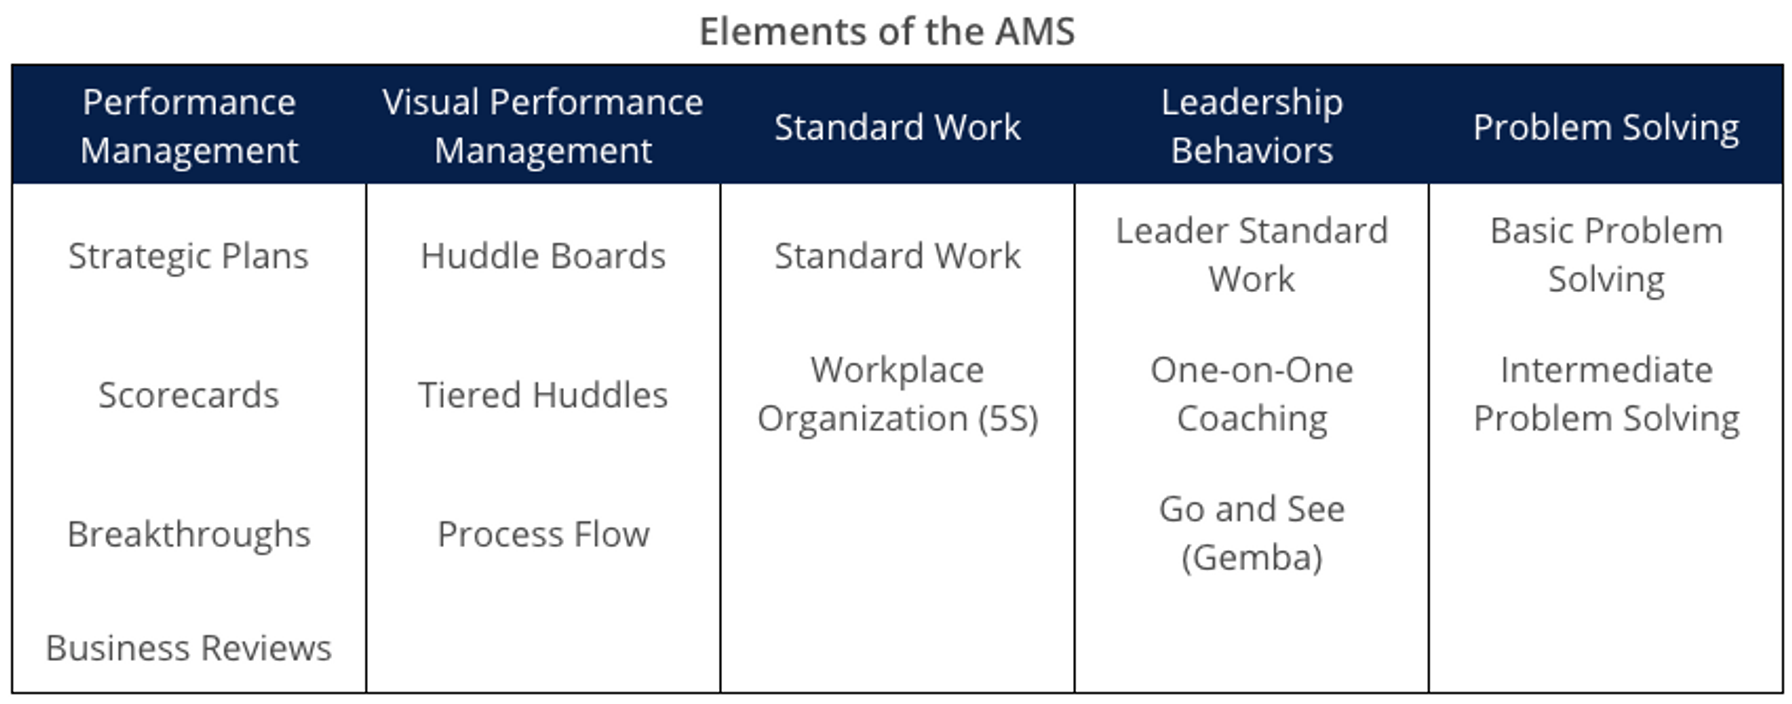 Elements of the AMS